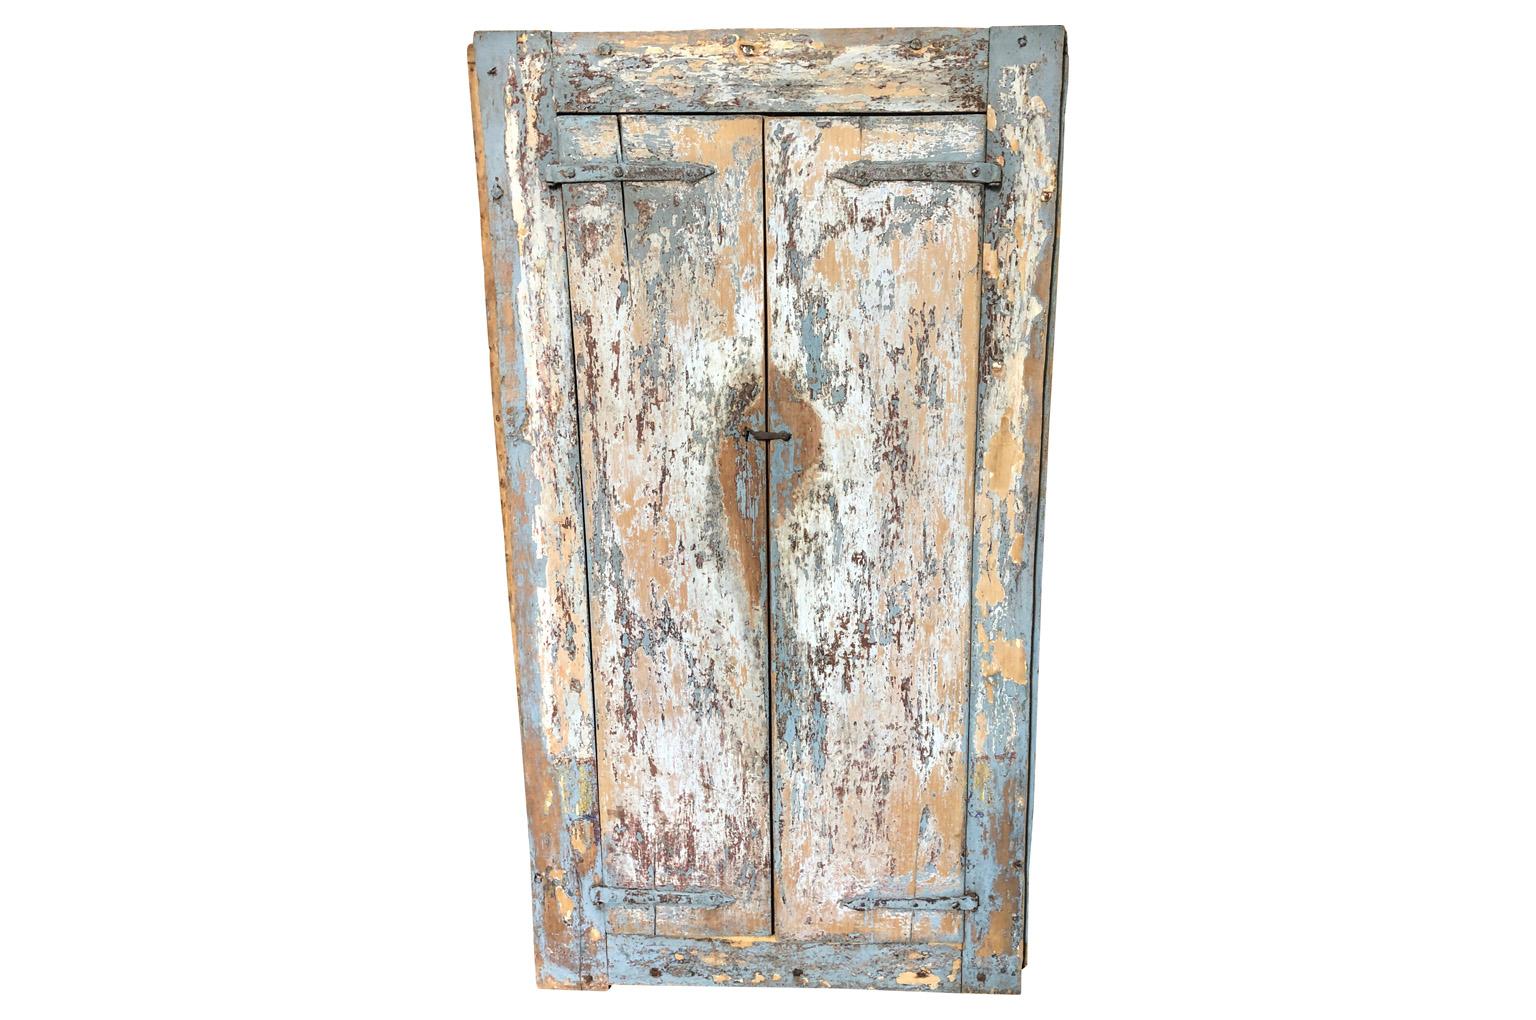 A very charming 18th century primitive armoire from Spain. Wonderful diminutive scale. Soundly constructed from painted wood. Super patina.